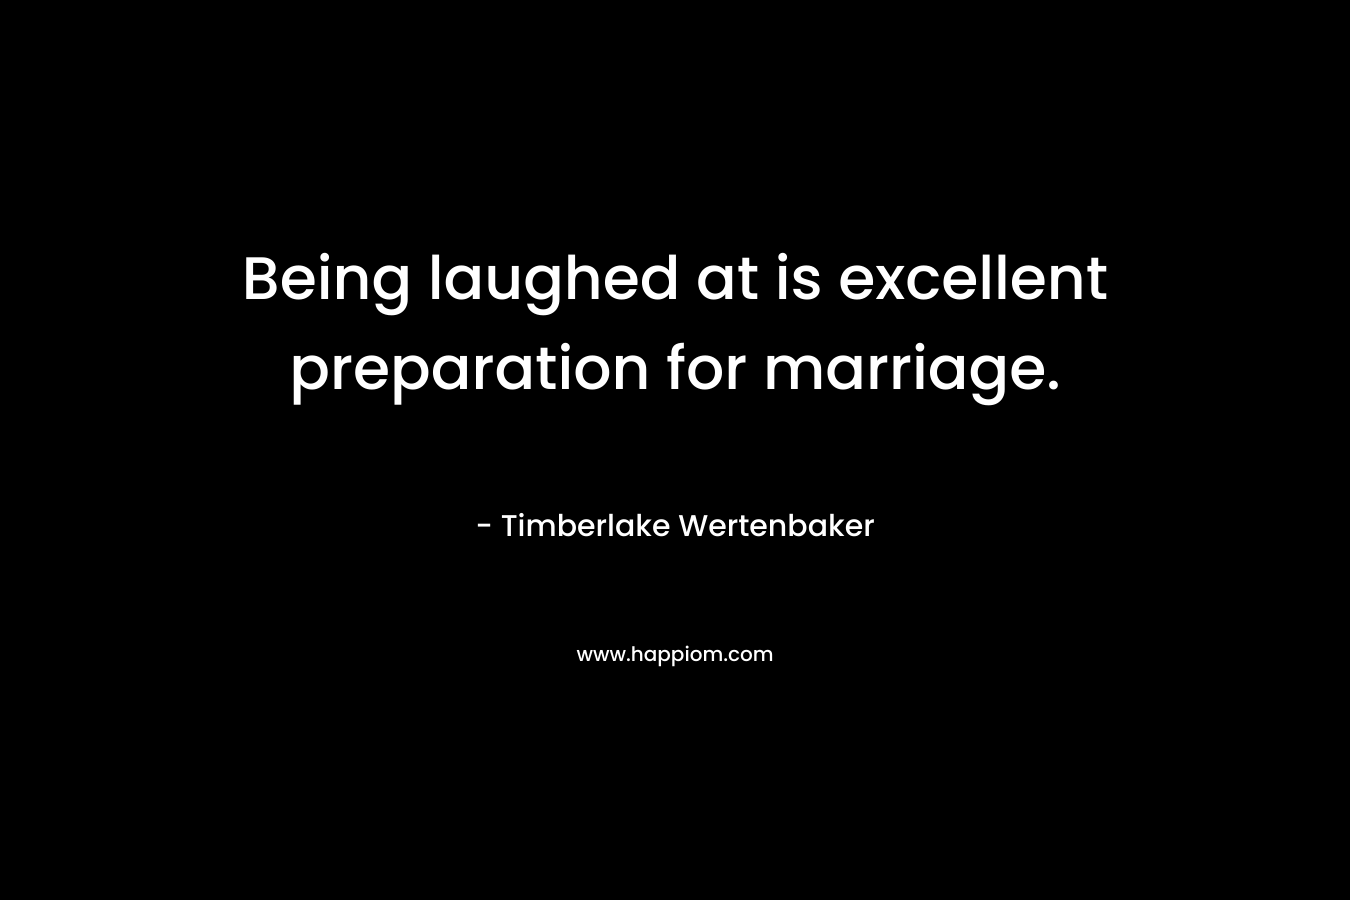 Being laughed at is excellent preparation for marriage. – Timberlake Wertenbaker